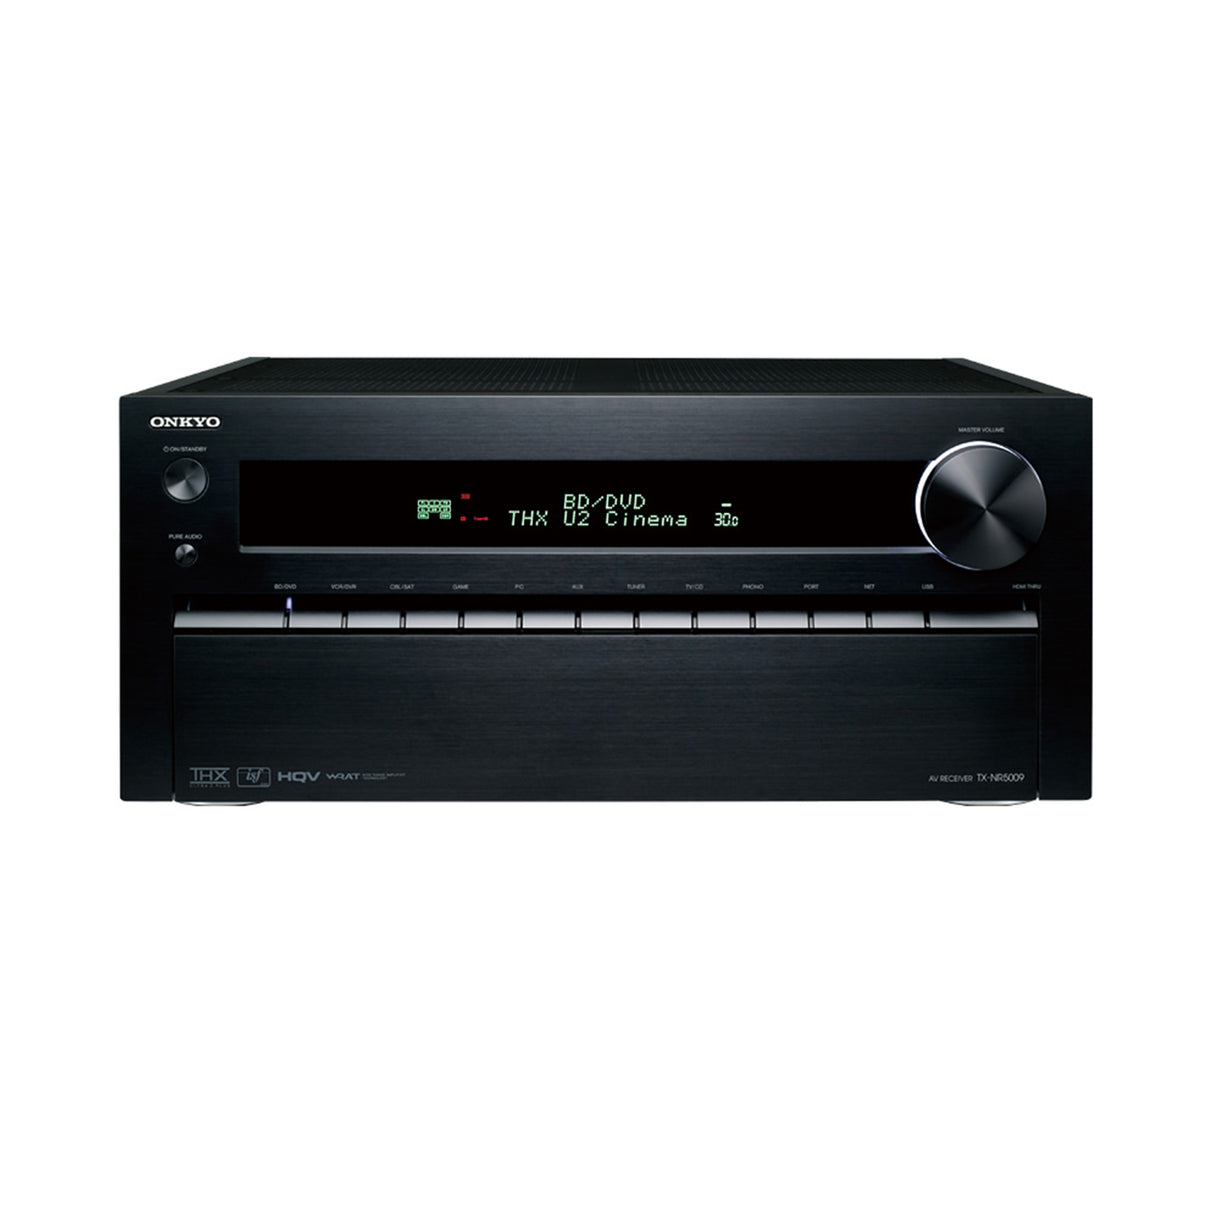 Onkyo TX-NR5009 - 9.2 Channel Network AV Receiver (Demo Unit / Without Box Unit)